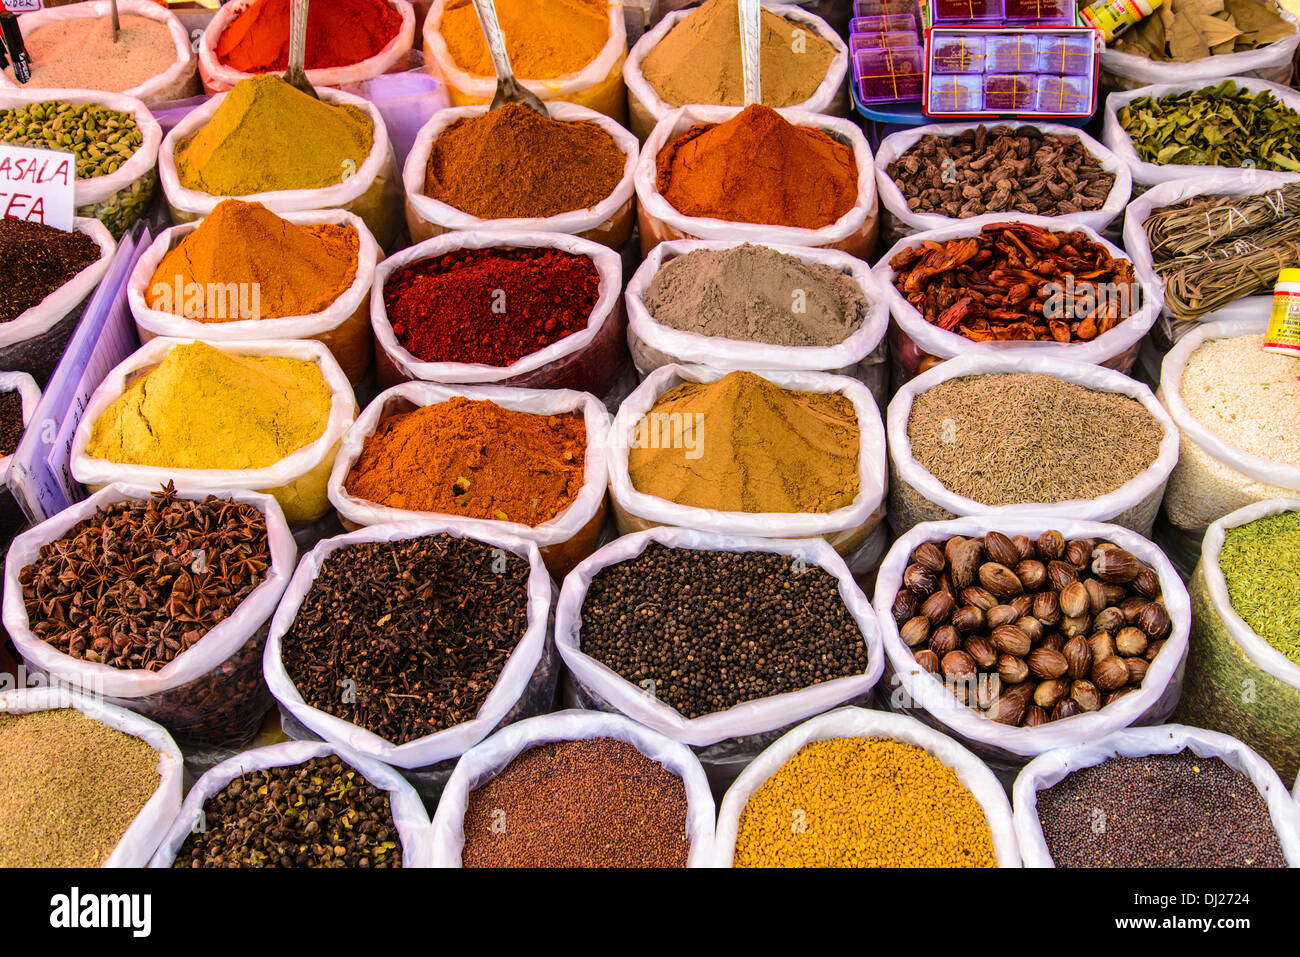 Indian Spices on sale at the Mapusa Market, Goa, India Stock Photo